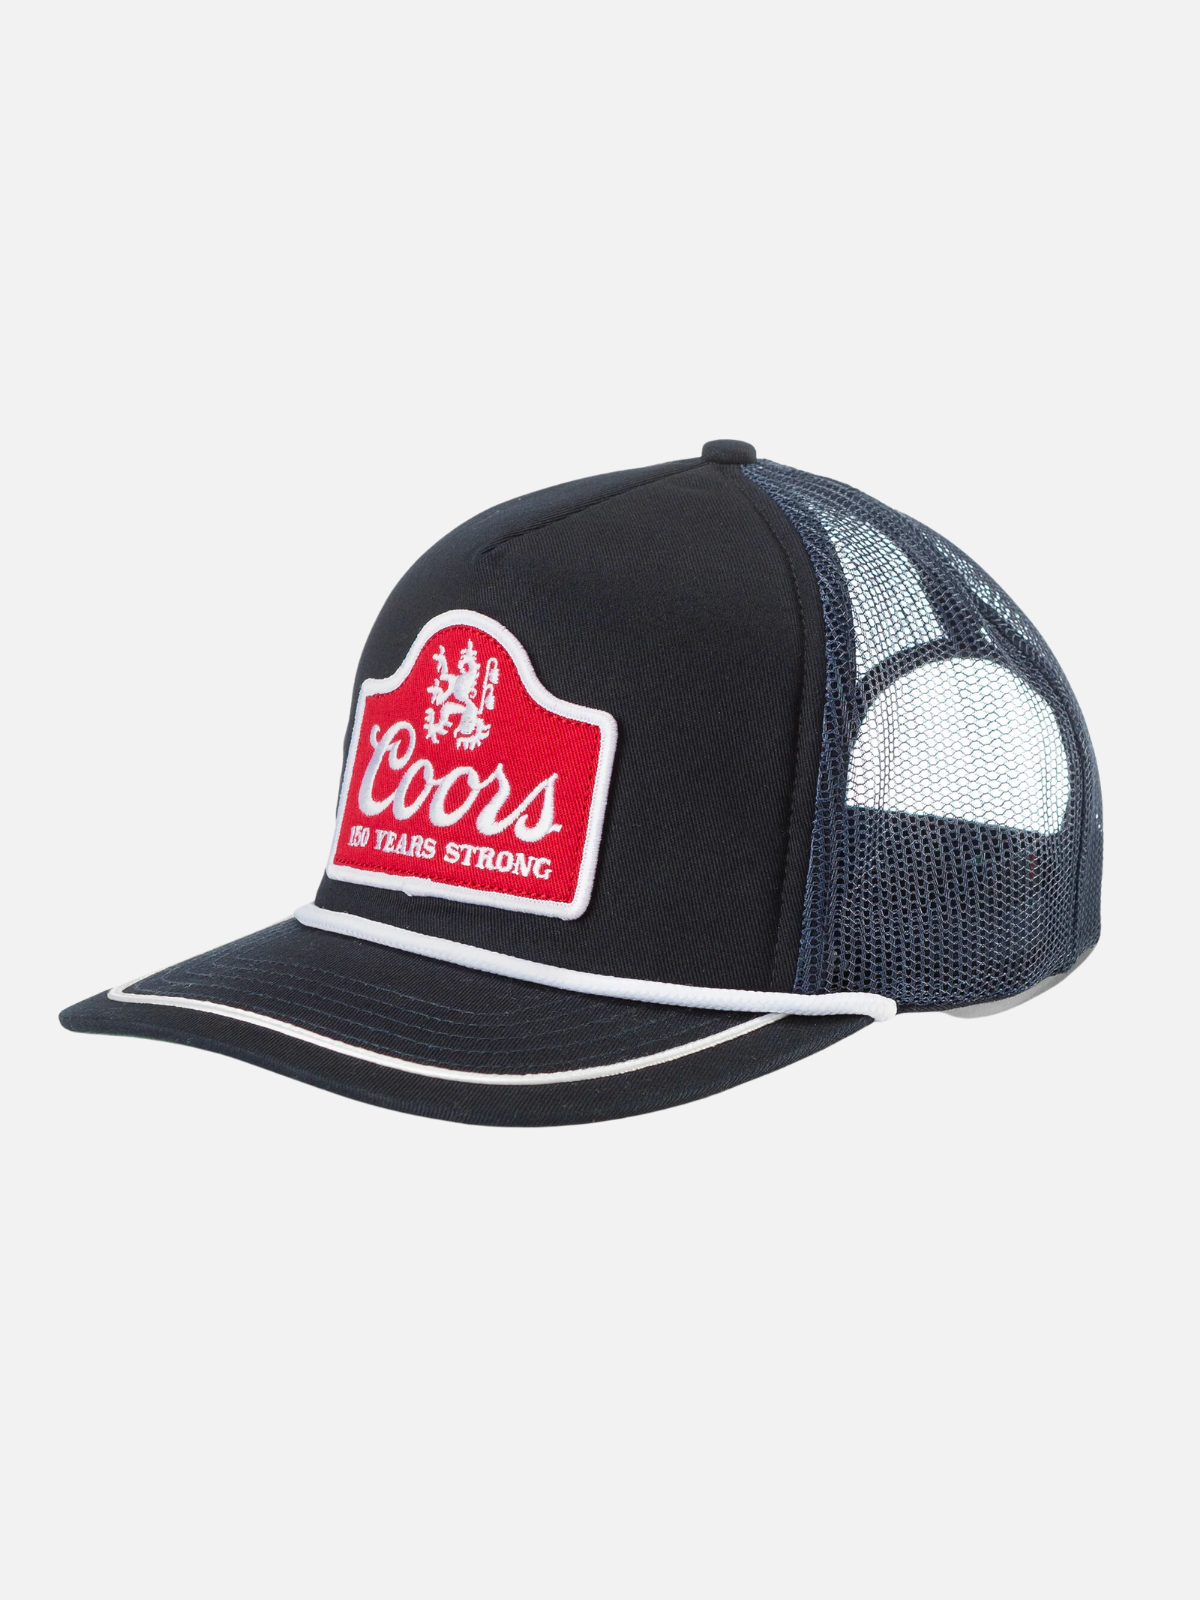 seager coors banquet collaboration celebrating 150 years hat snapback trucker hat navy blue white red cotton canvas polyester mesh kempt athens ga georgia men's clothing store